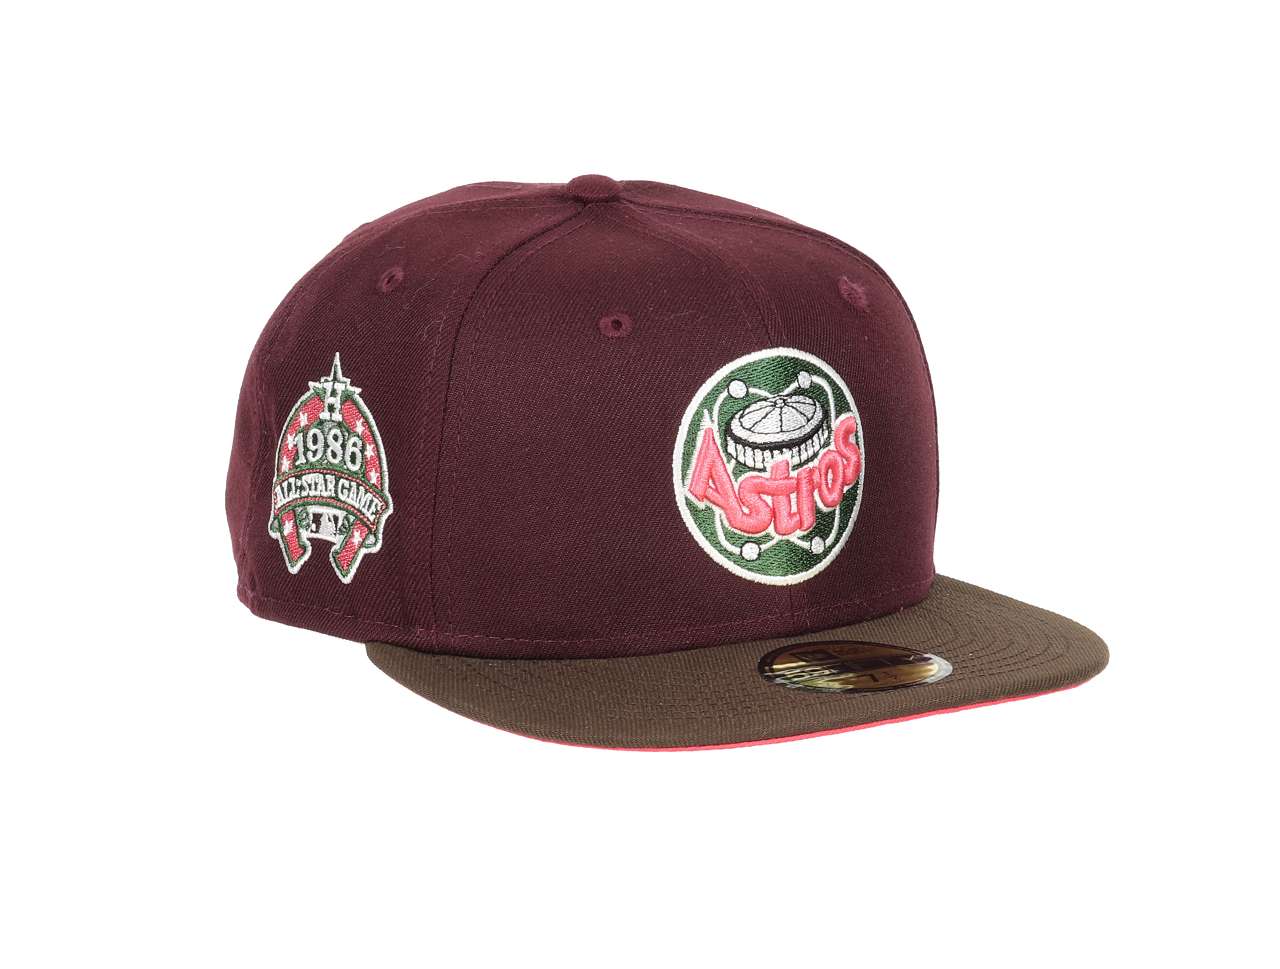 Houston Astros MLB Cooperstown All Star Game 1986 Maroon Walnut 59Fifty Basecap New Era